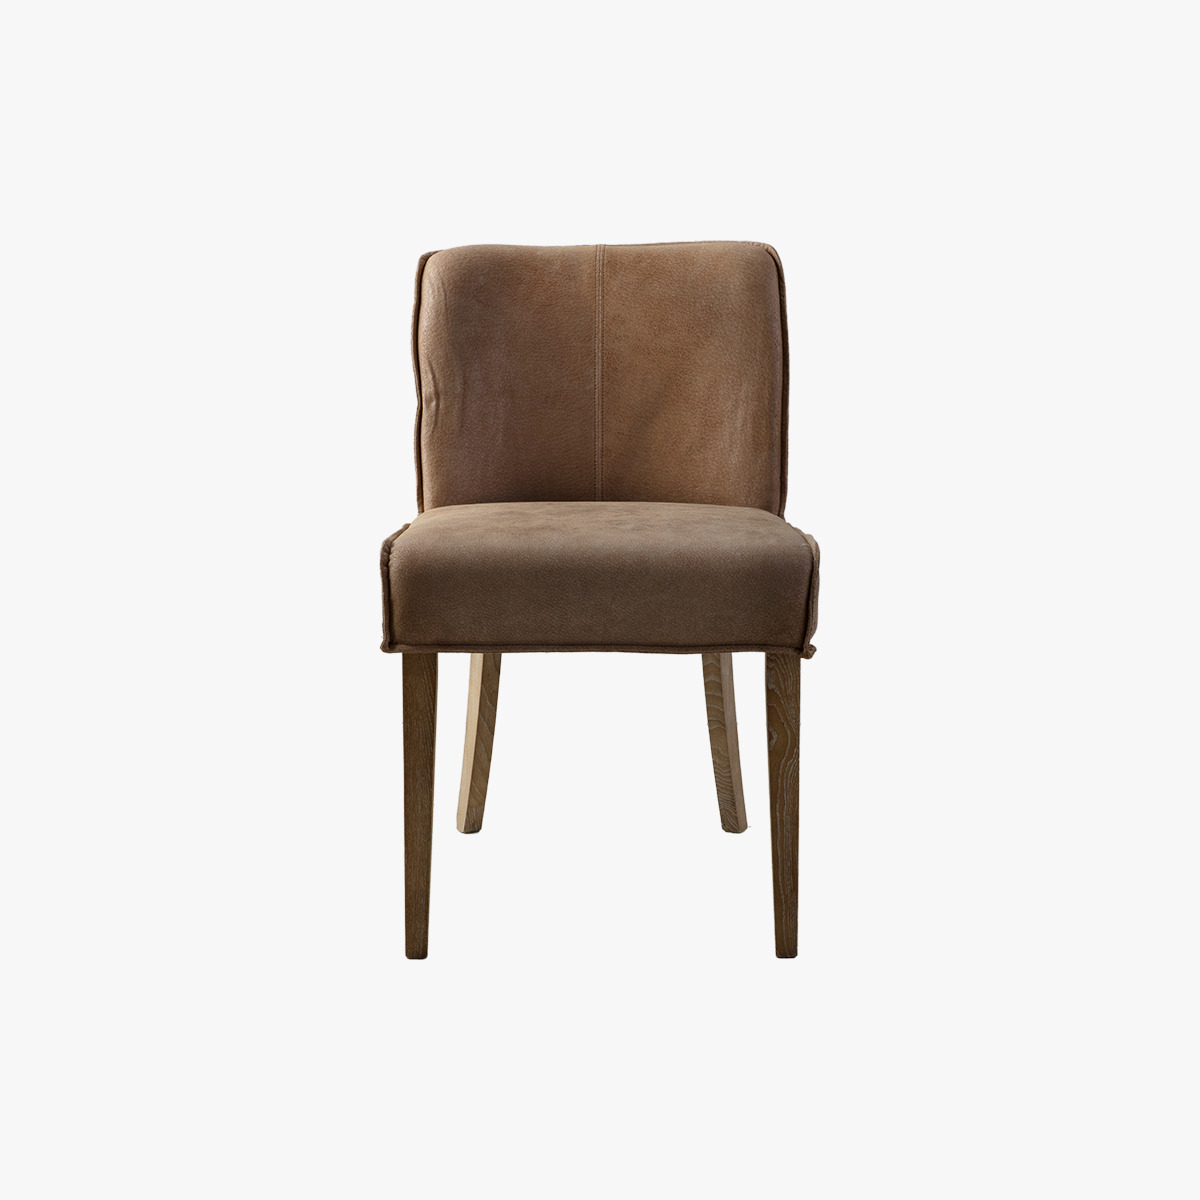 Ewan Leather Dining Chair, Pack of two